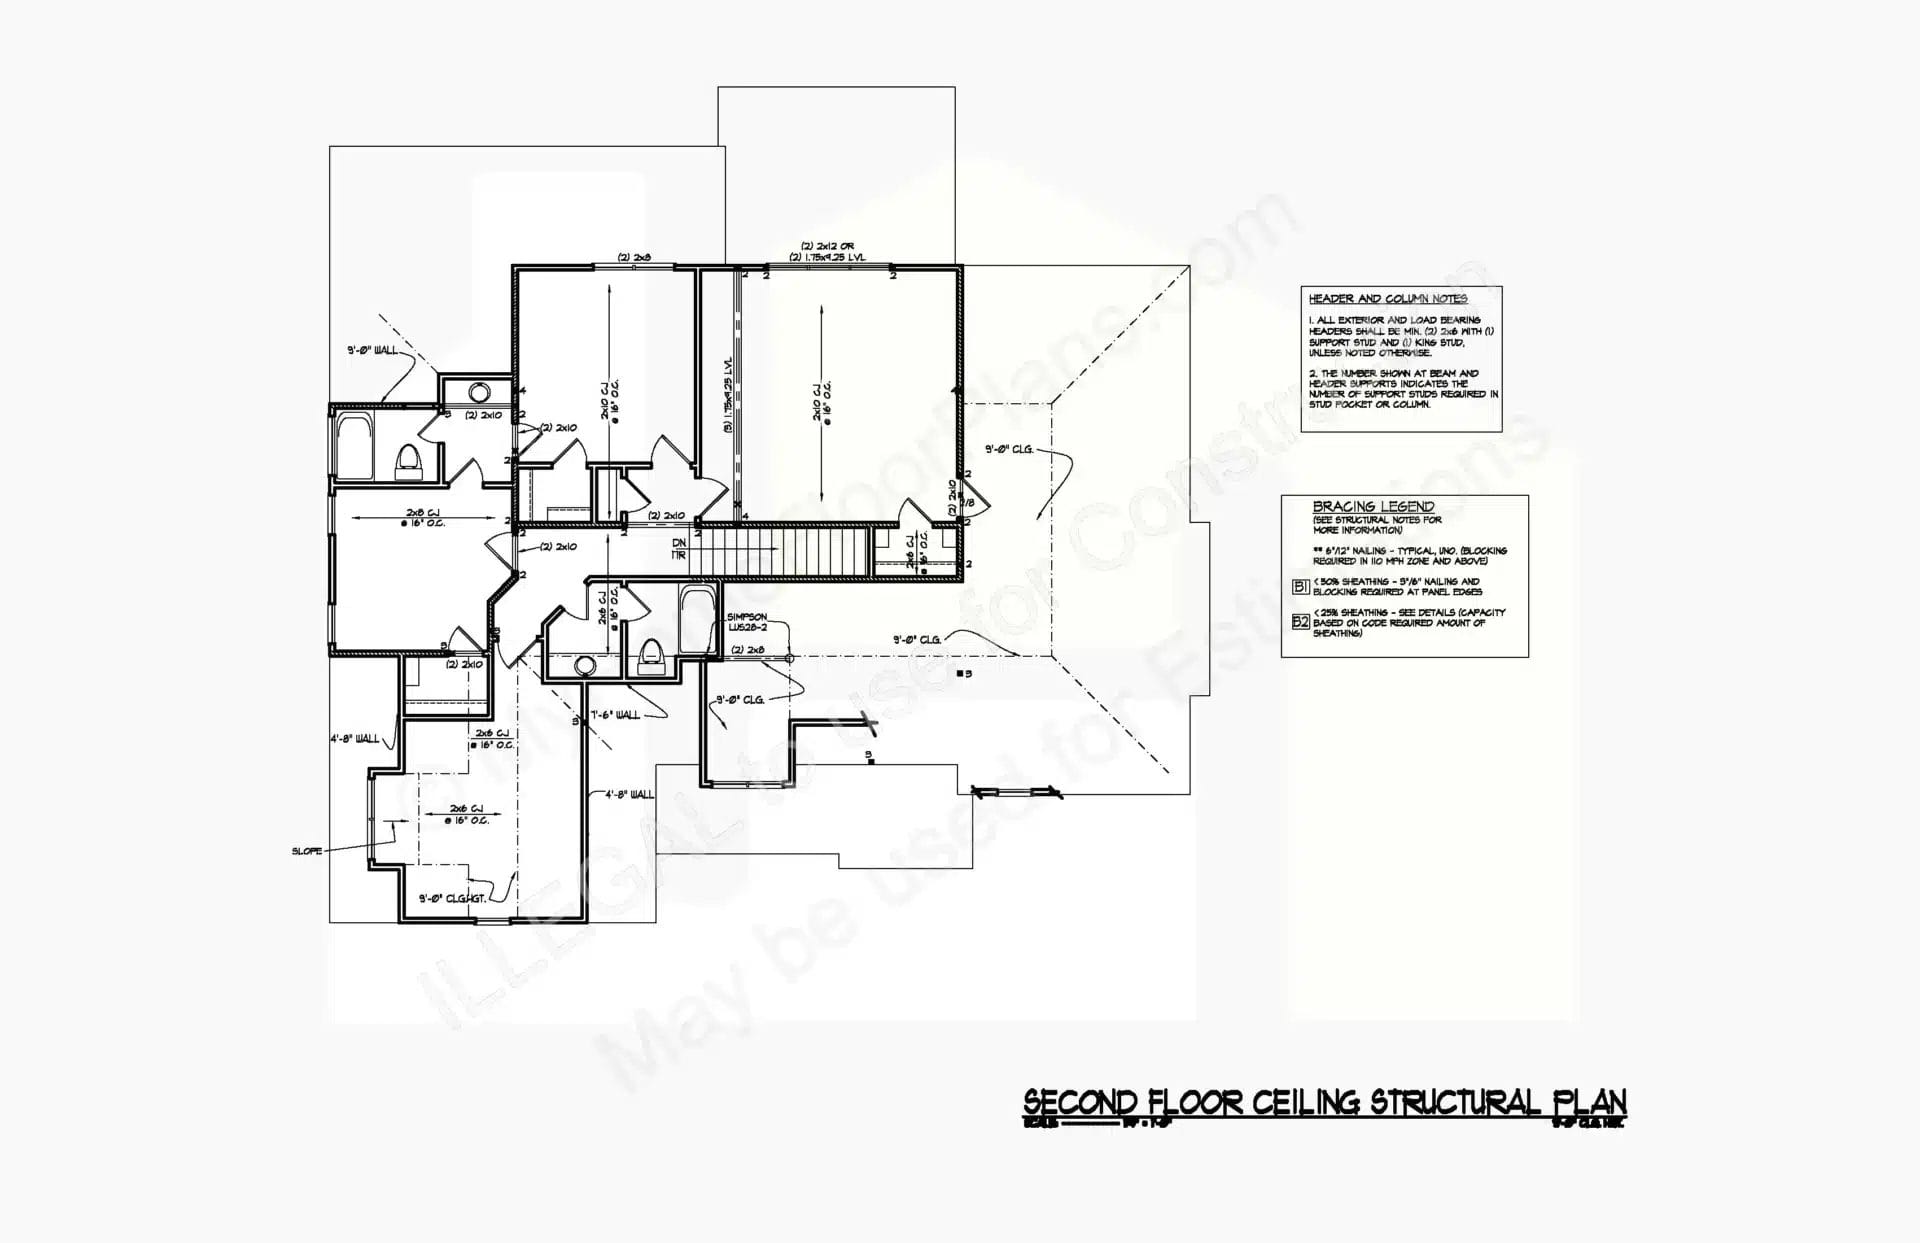 Architectural blueprint of a 13-1214 second-floor ceiling structural plan, featuring a detailed layout with labeled rooms, dimensions, and construction notes. The design includes beams, joists, and annotations for specific building sections.